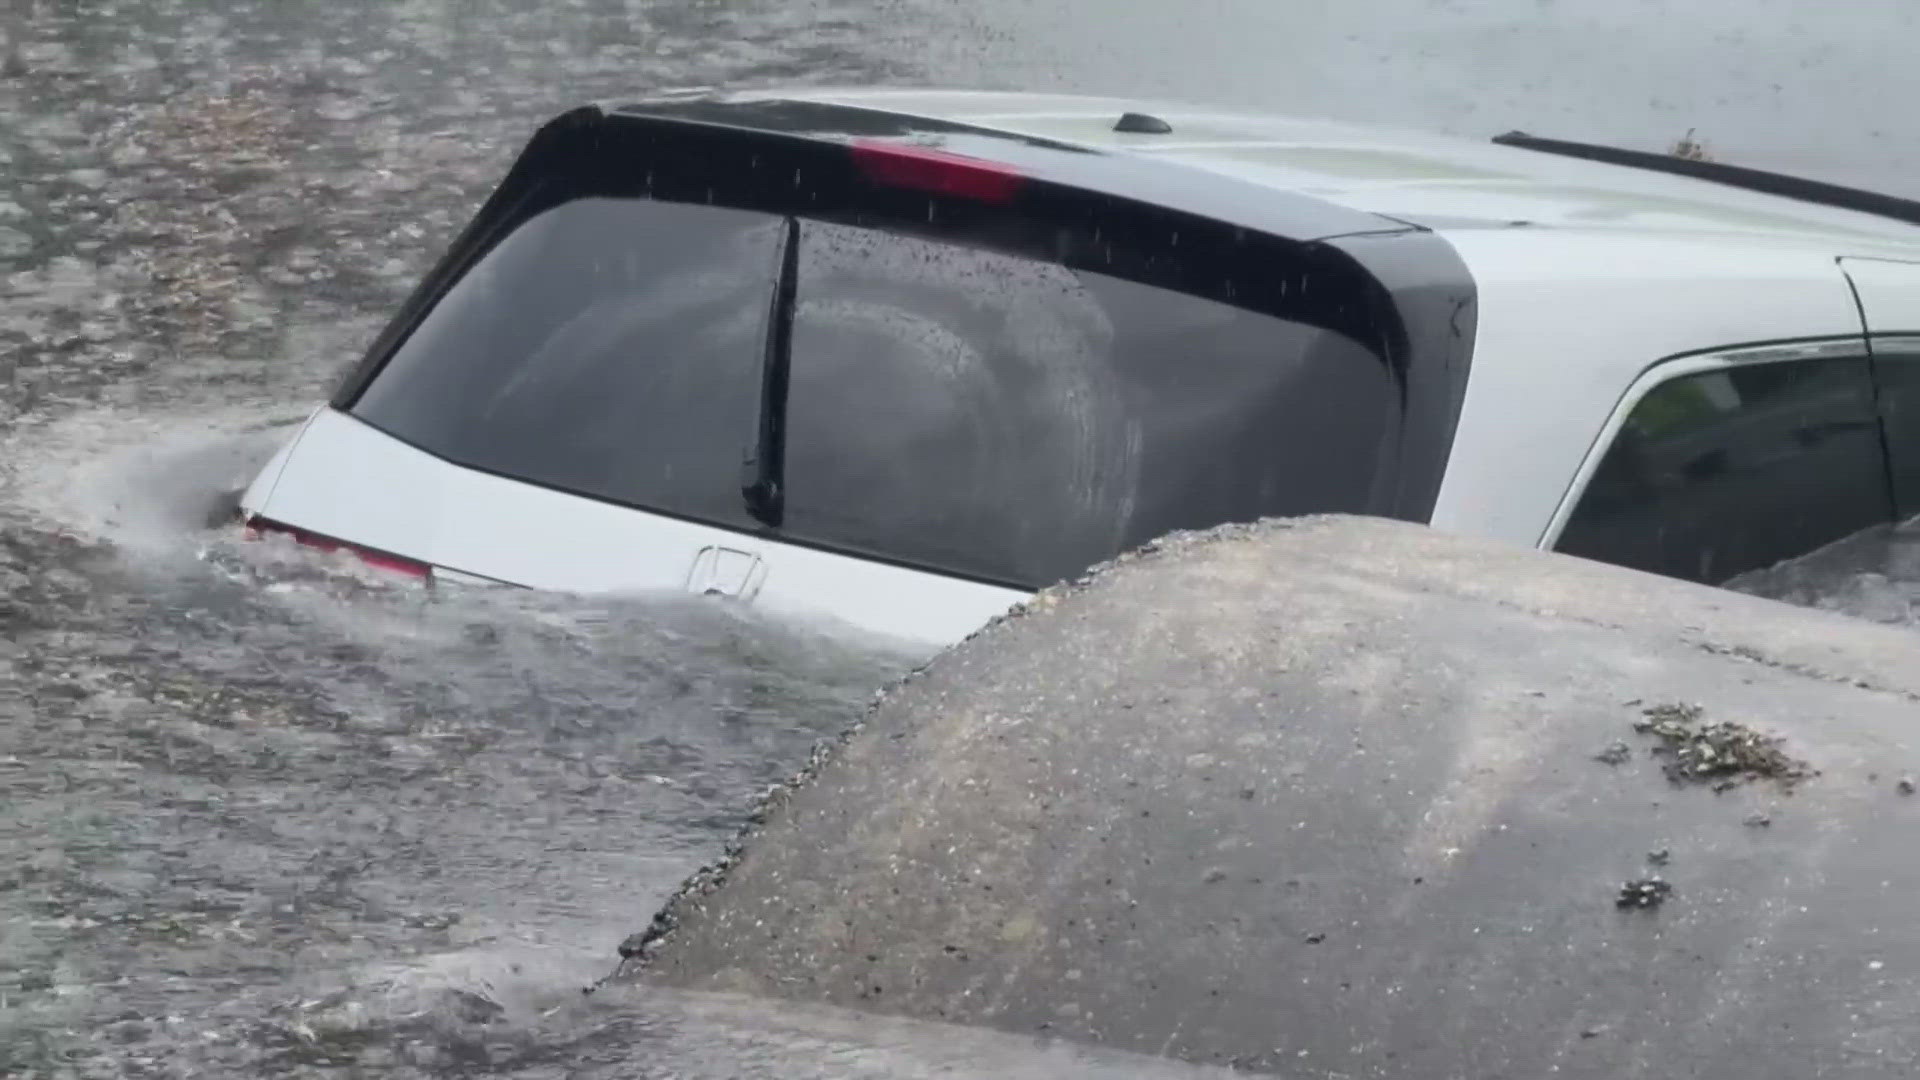 The Jefferson Parish Sheriff's Office says that a hit-and-run event left a family in a car sinking into a Metairie canal Wednesday.